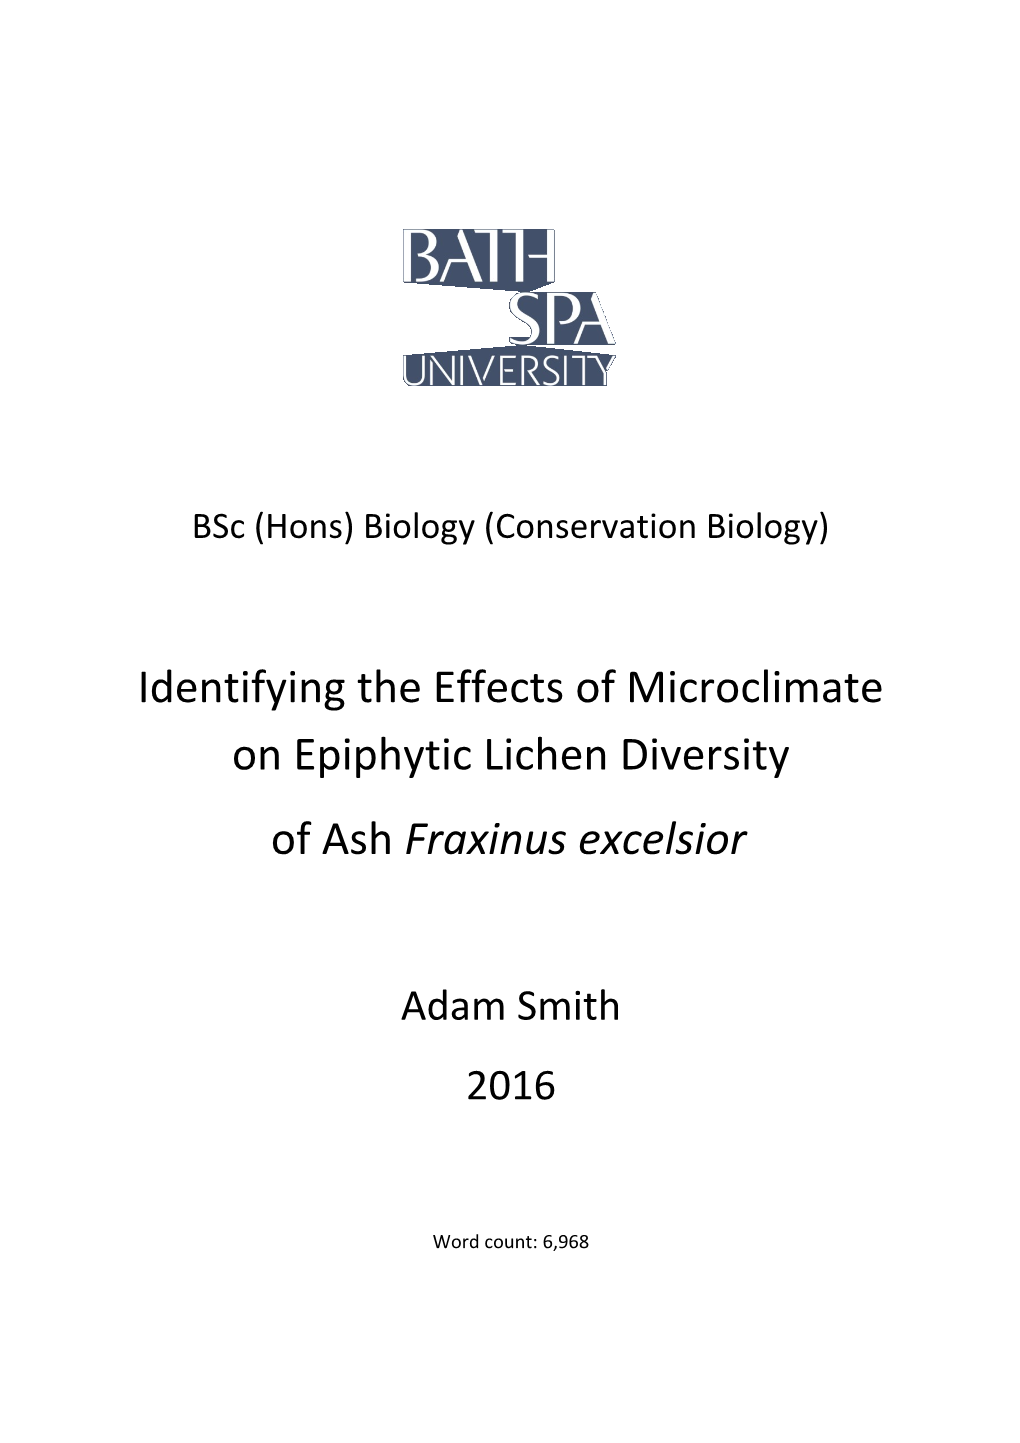 Identifying the Effect of Microclimate on Epitic Lichen Diversity of Ash Fraxinus Excelsior